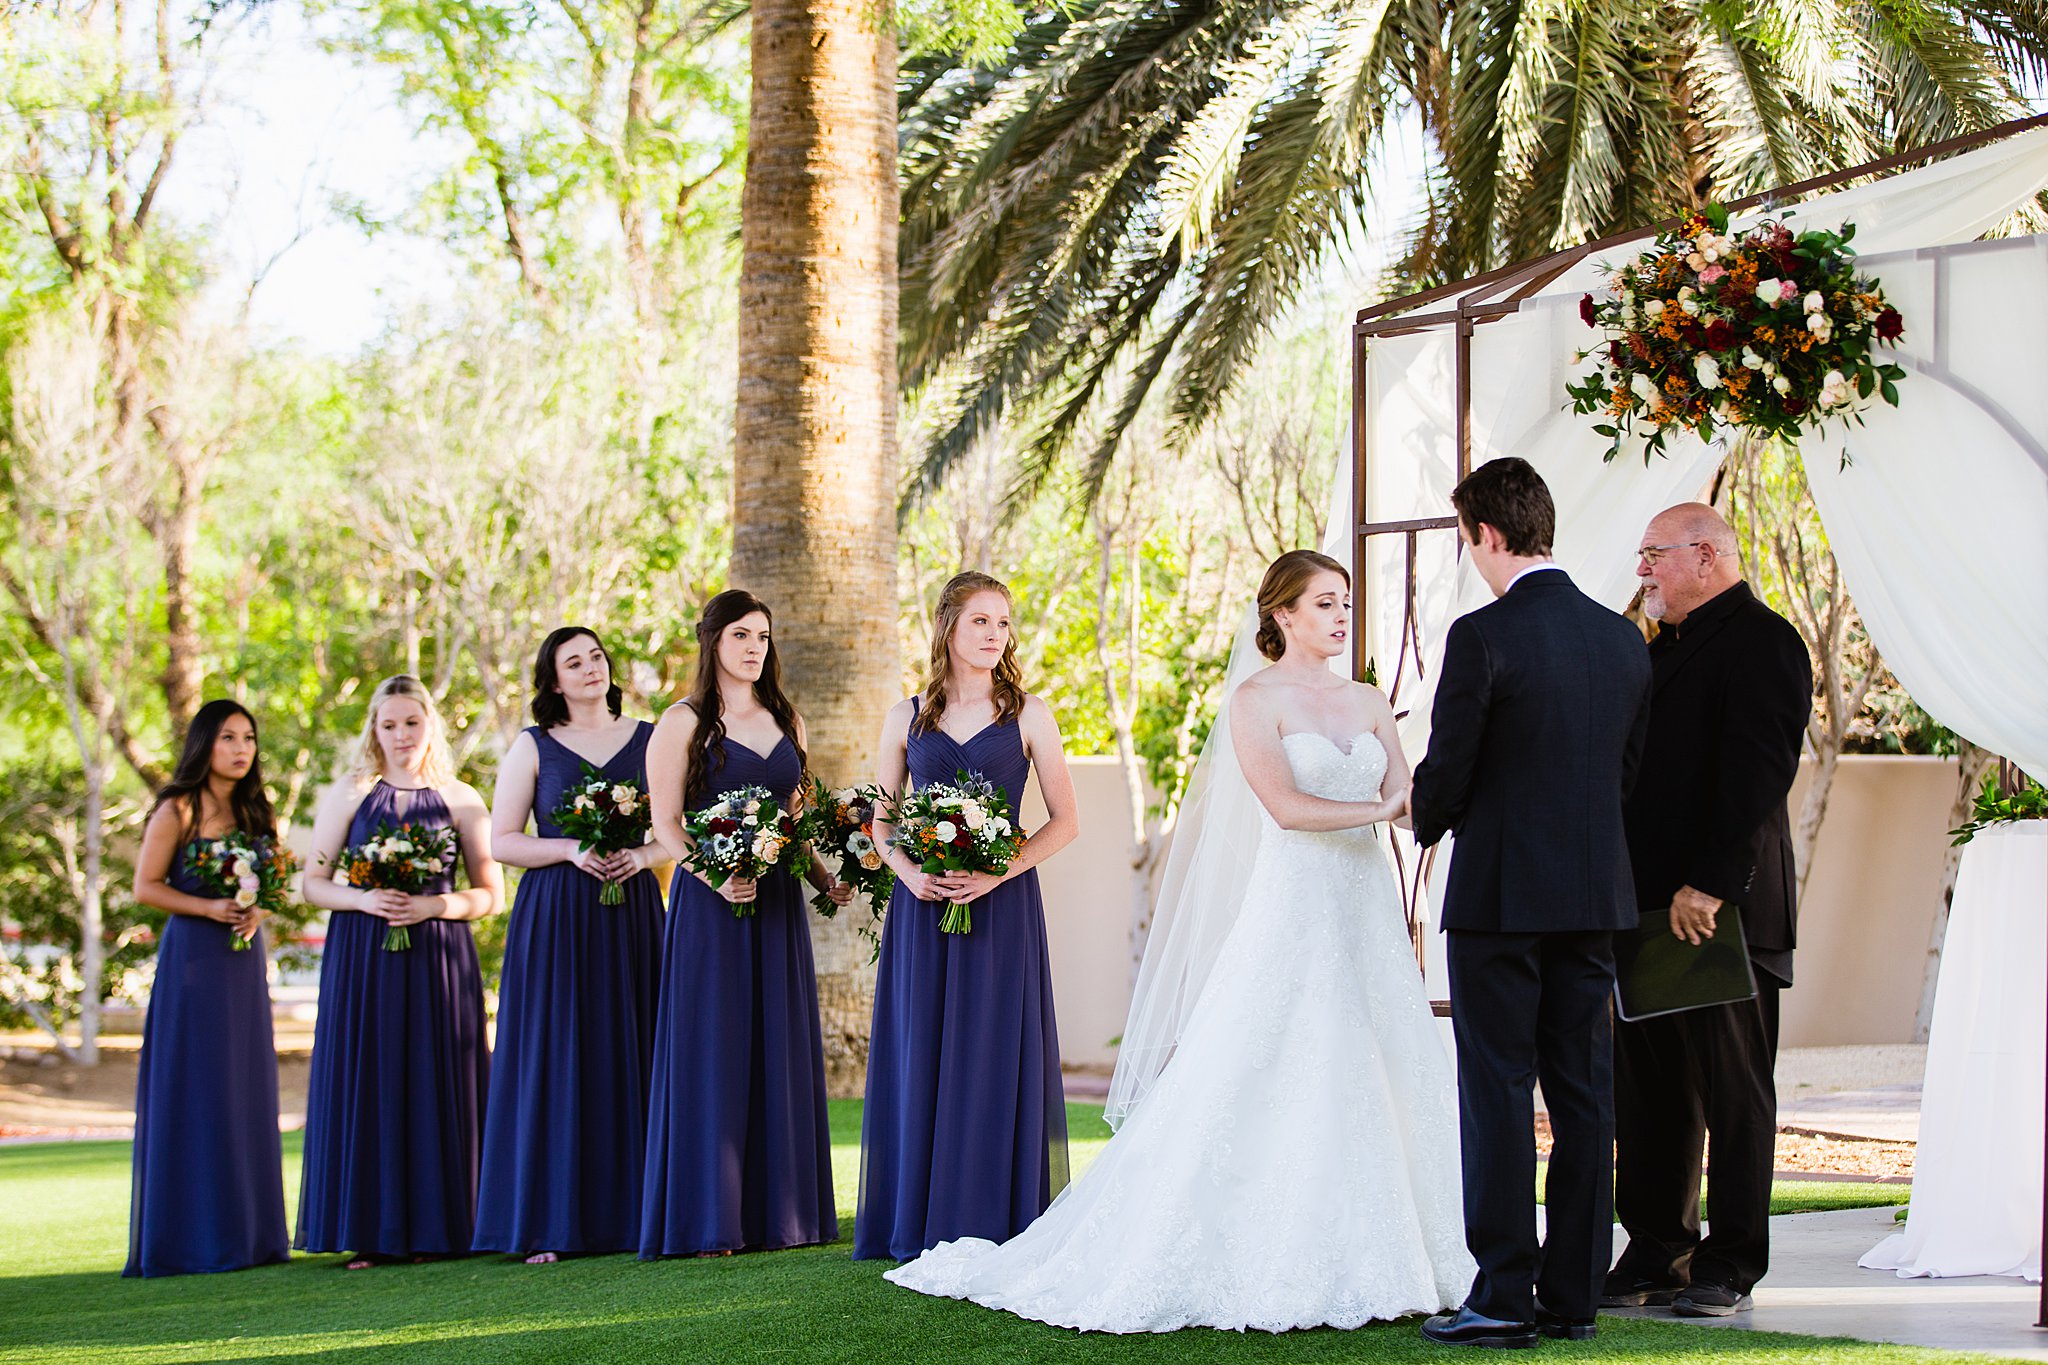 Bride looking at her groom during their wedding ceremony at Secret Garden Events by Phoenix wedding photographer PMA Photography.